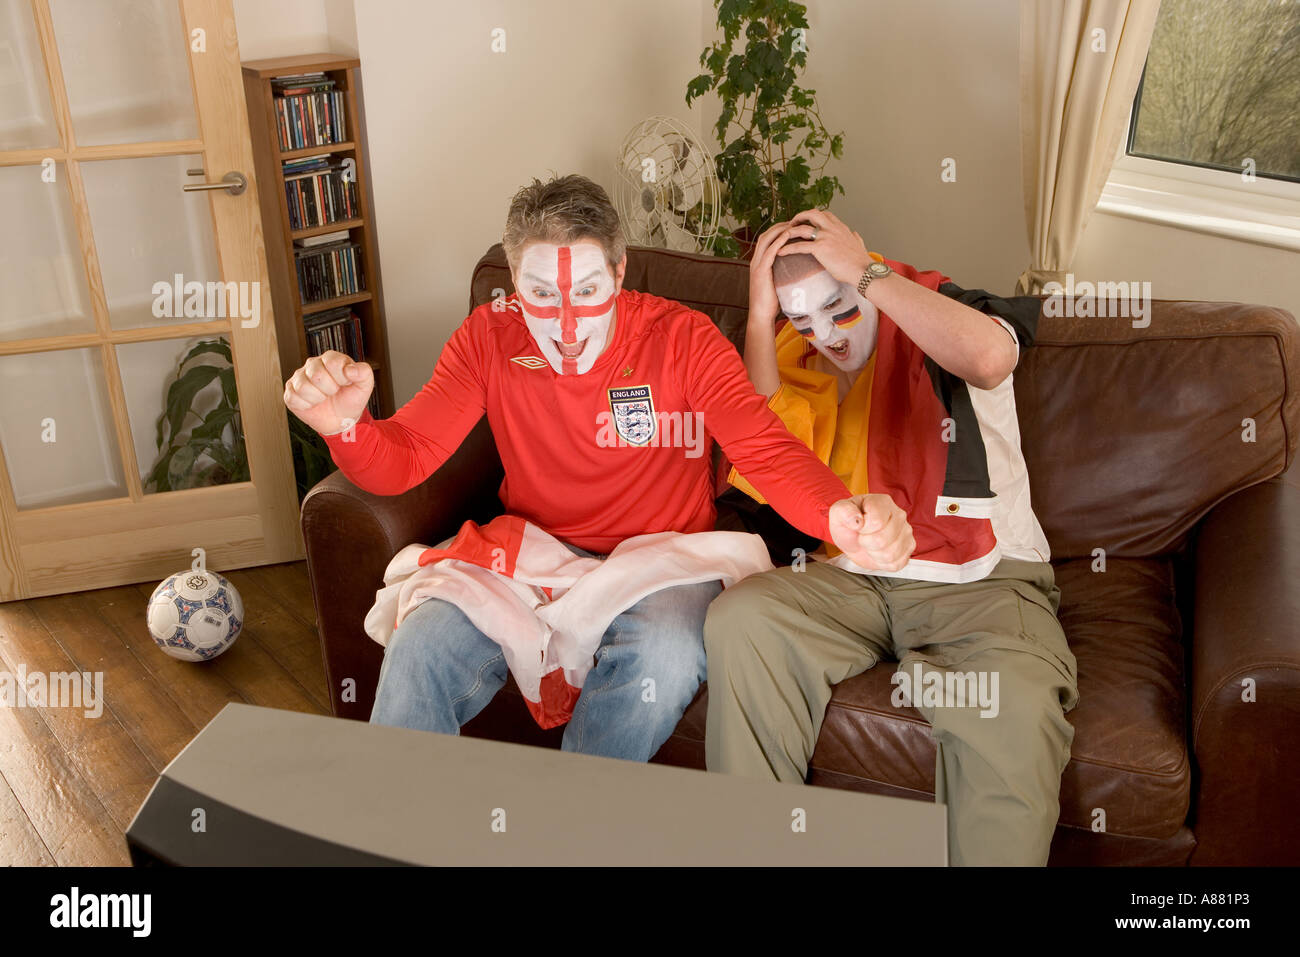 Model released. England and German football fans watching match on TV as England wins and Germany looses. Stock Photo